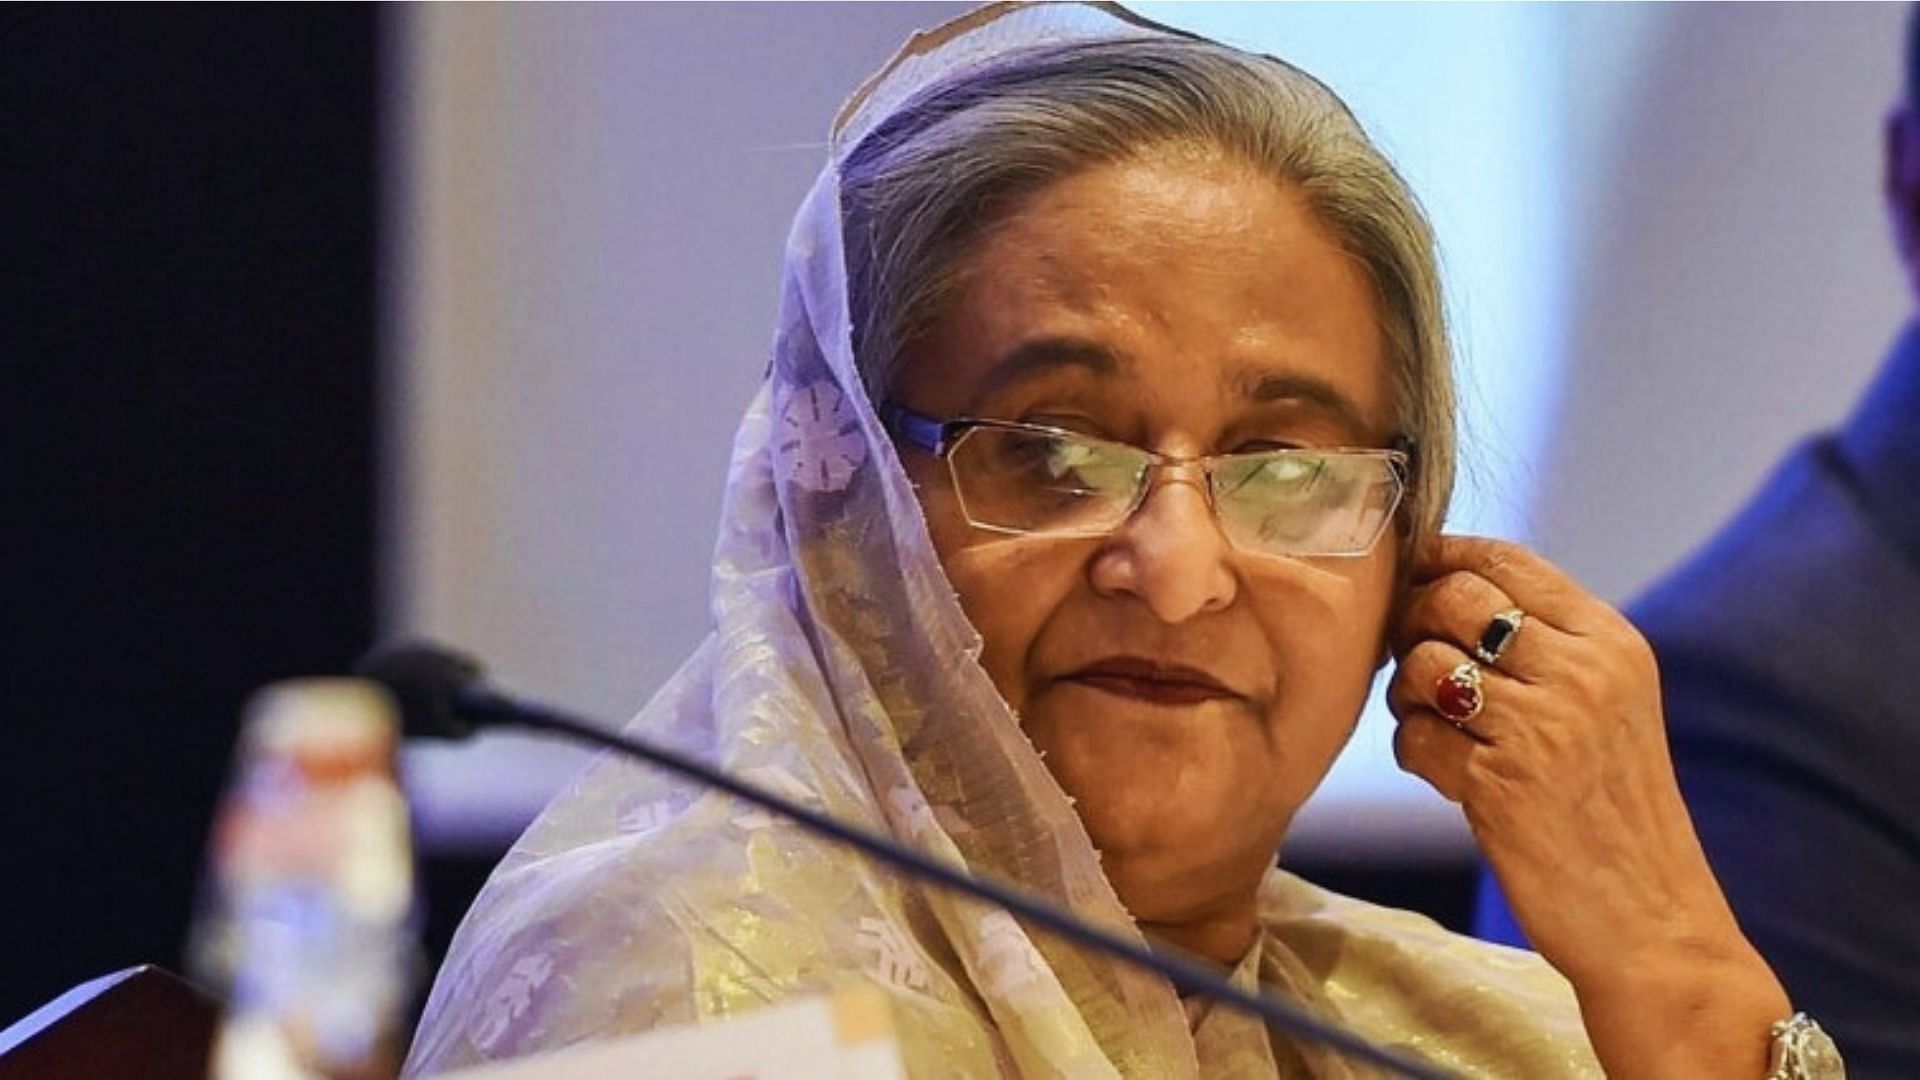 <div class="paragraphs"><p>Hasina’s main external security concern post-election is the <ins><a href="https://thediplomat.com/2023/12/the-rakhine-conundrum-how-should-bangladesh-respond-to-operation-1027/" rel="noreferrer noopener">intensifying war</a></ins> in neighboring Myanmar, which has sometimes <ins><a href="https://www.reuters.com/world/asia-pacific/rohingya-teenager-killed-bangladesh-by-mortar-fired-myanmar-2022-09-17/" rel="noreferrer noopener">spilled into Bangladesh</a></ins>.</p></div>